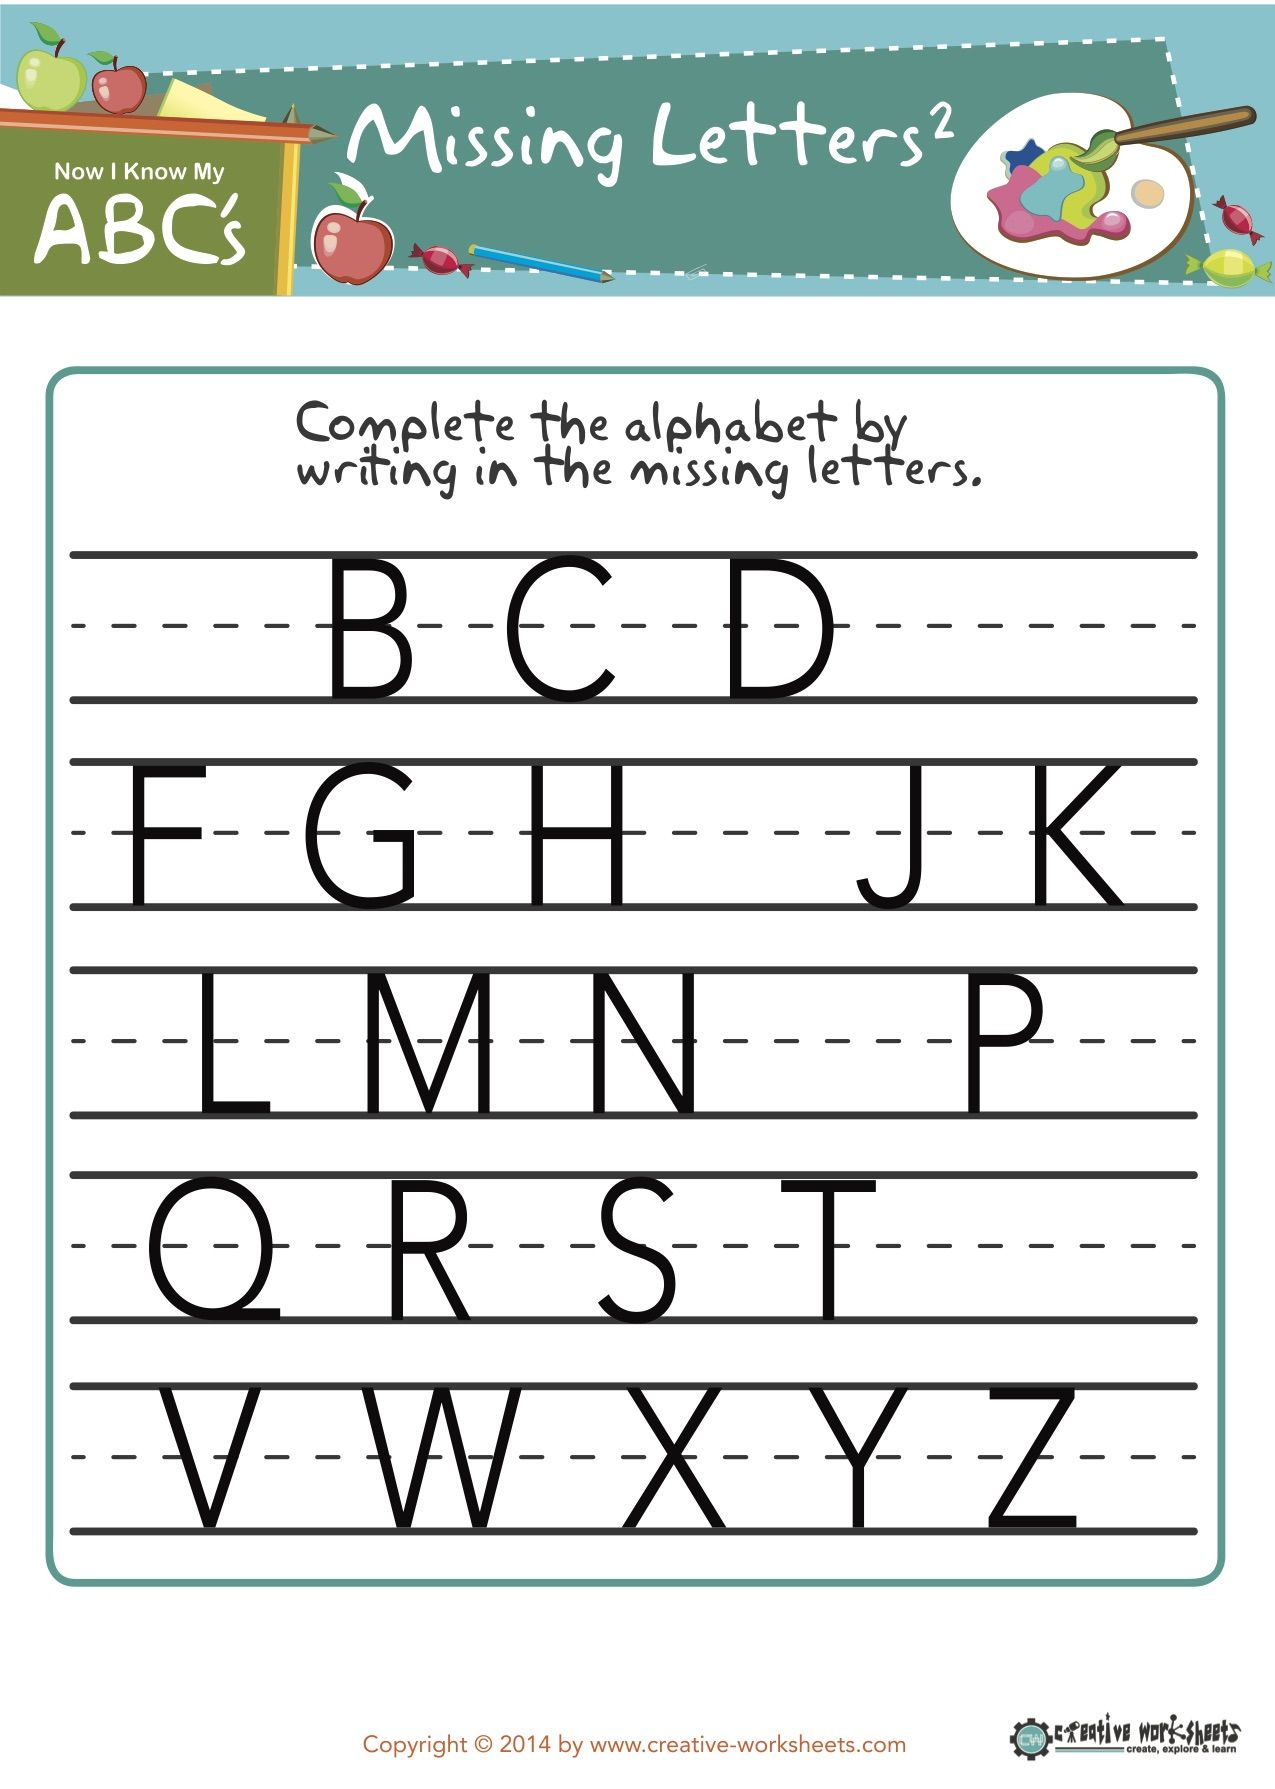 Great Resource For 3 - 6 Year Olds. Back To School with Alphabet Worksheets For 6 Year Olds